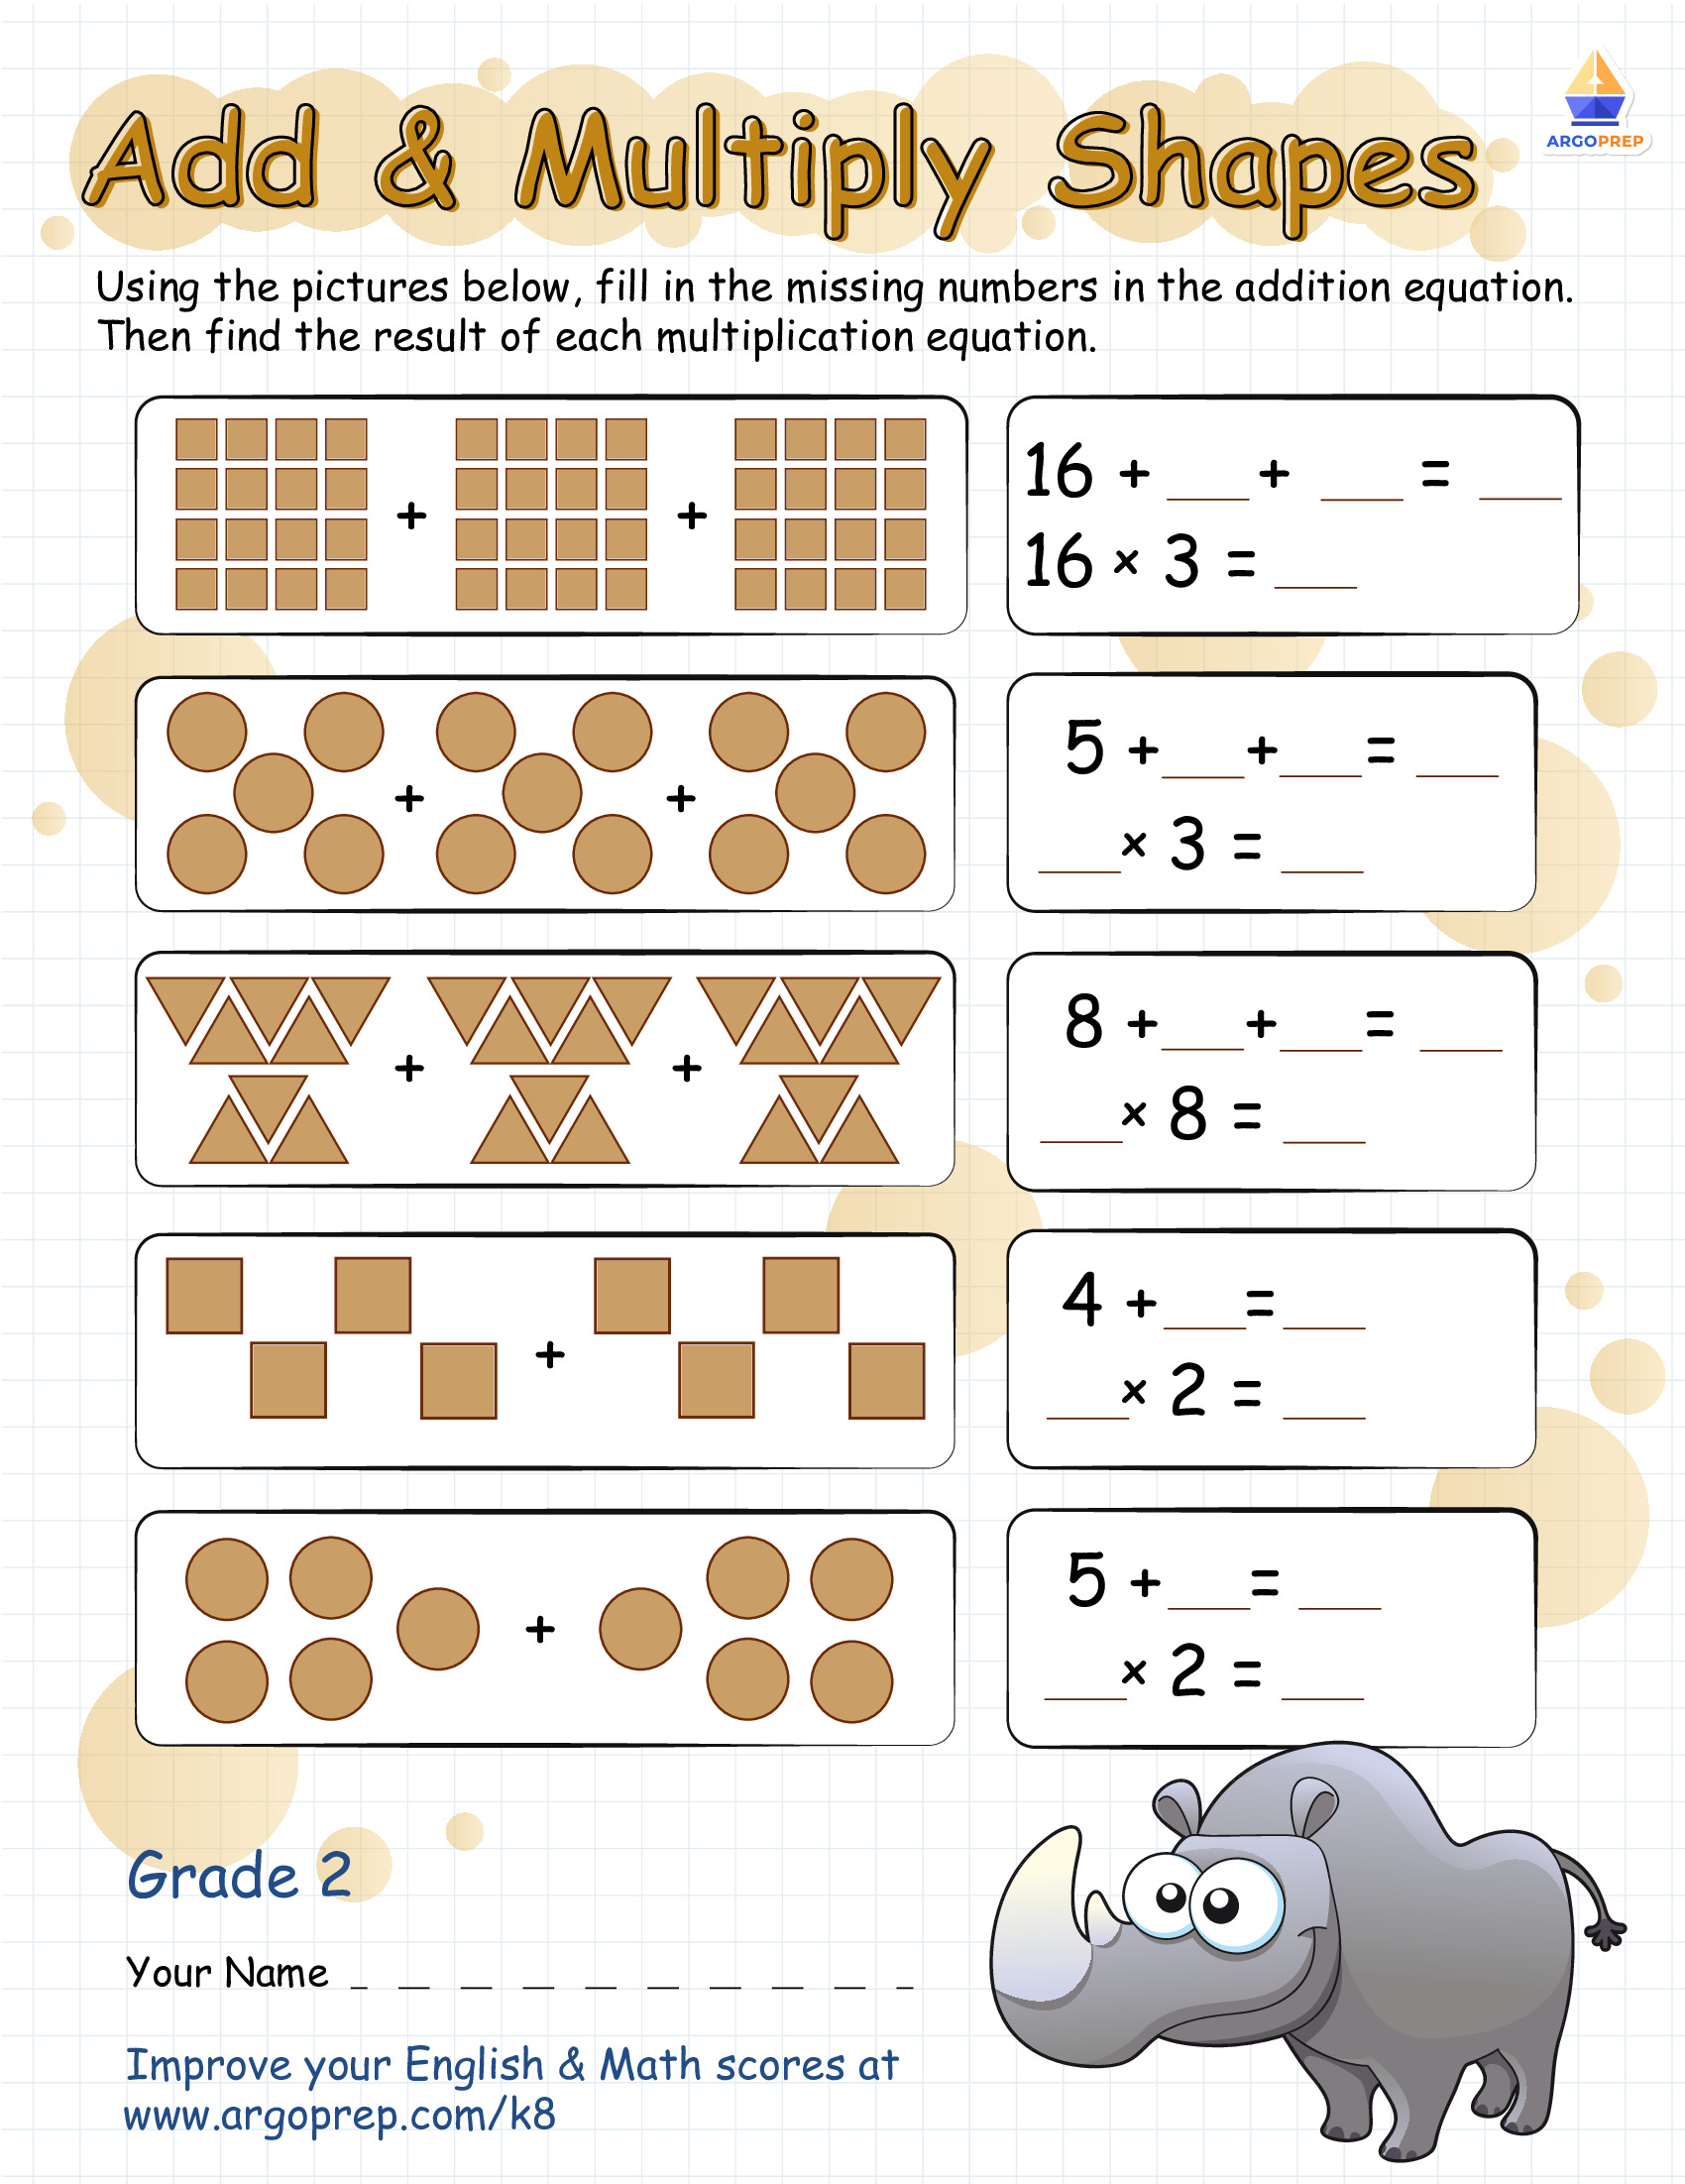 multiplication-add-and-multiply-repeated-addition-two-worksheets-free-printable-work